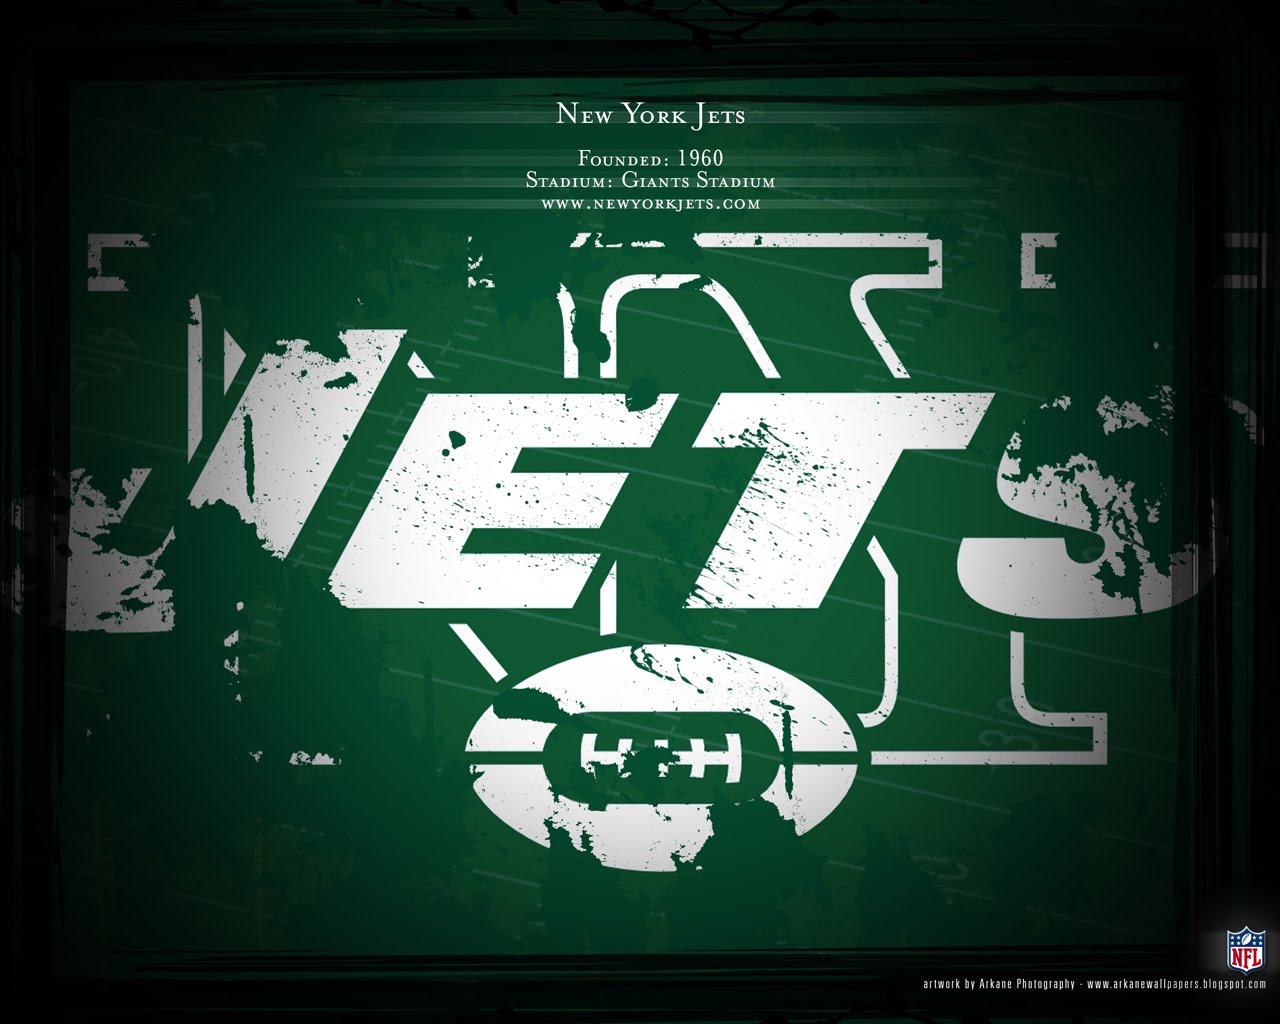  guys asked us for more New York Jets wallpapers so here you have